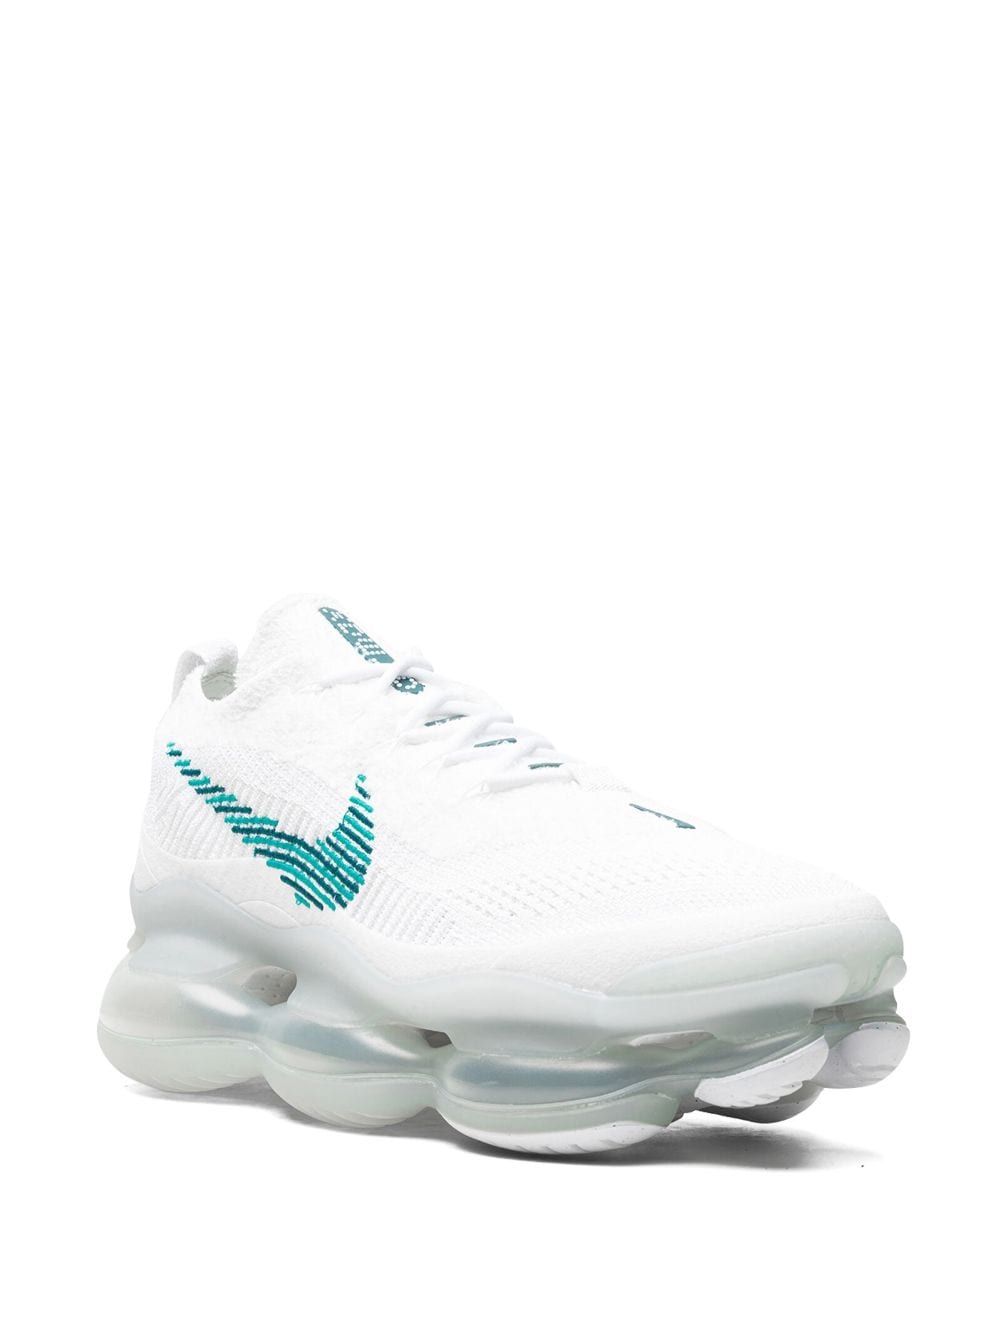 AIR MAX SCORPION FLYKNIT "WHITE GEODE TEAL" SNEAKERS